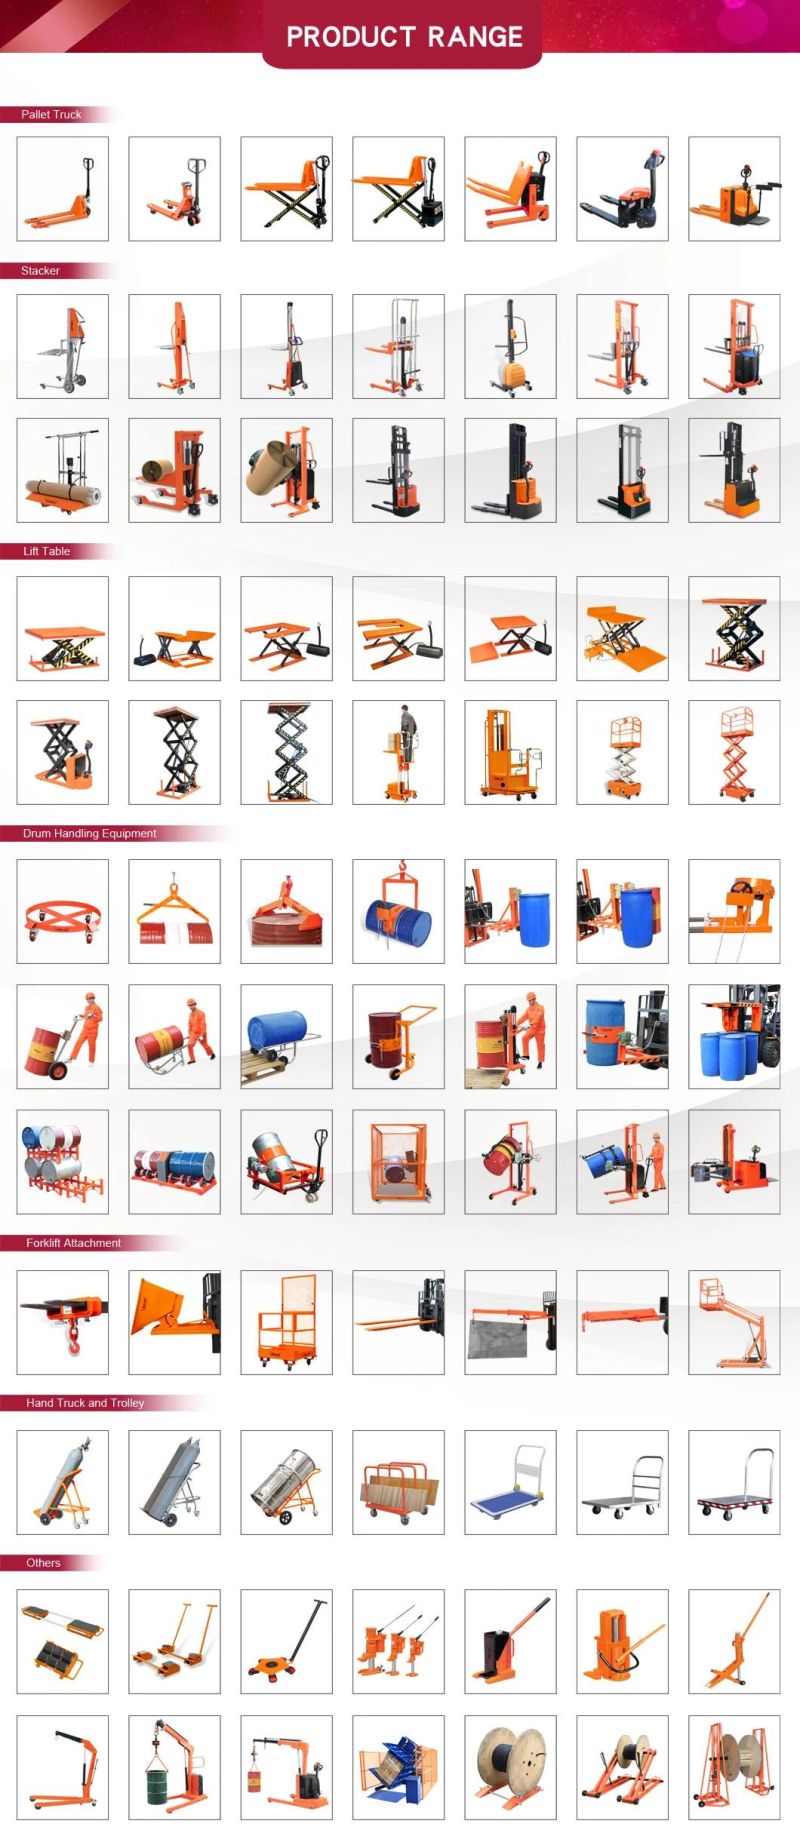 Loading Capacity 200kg and Lifting Fork Height 2500mm Fixed Fork Stacker